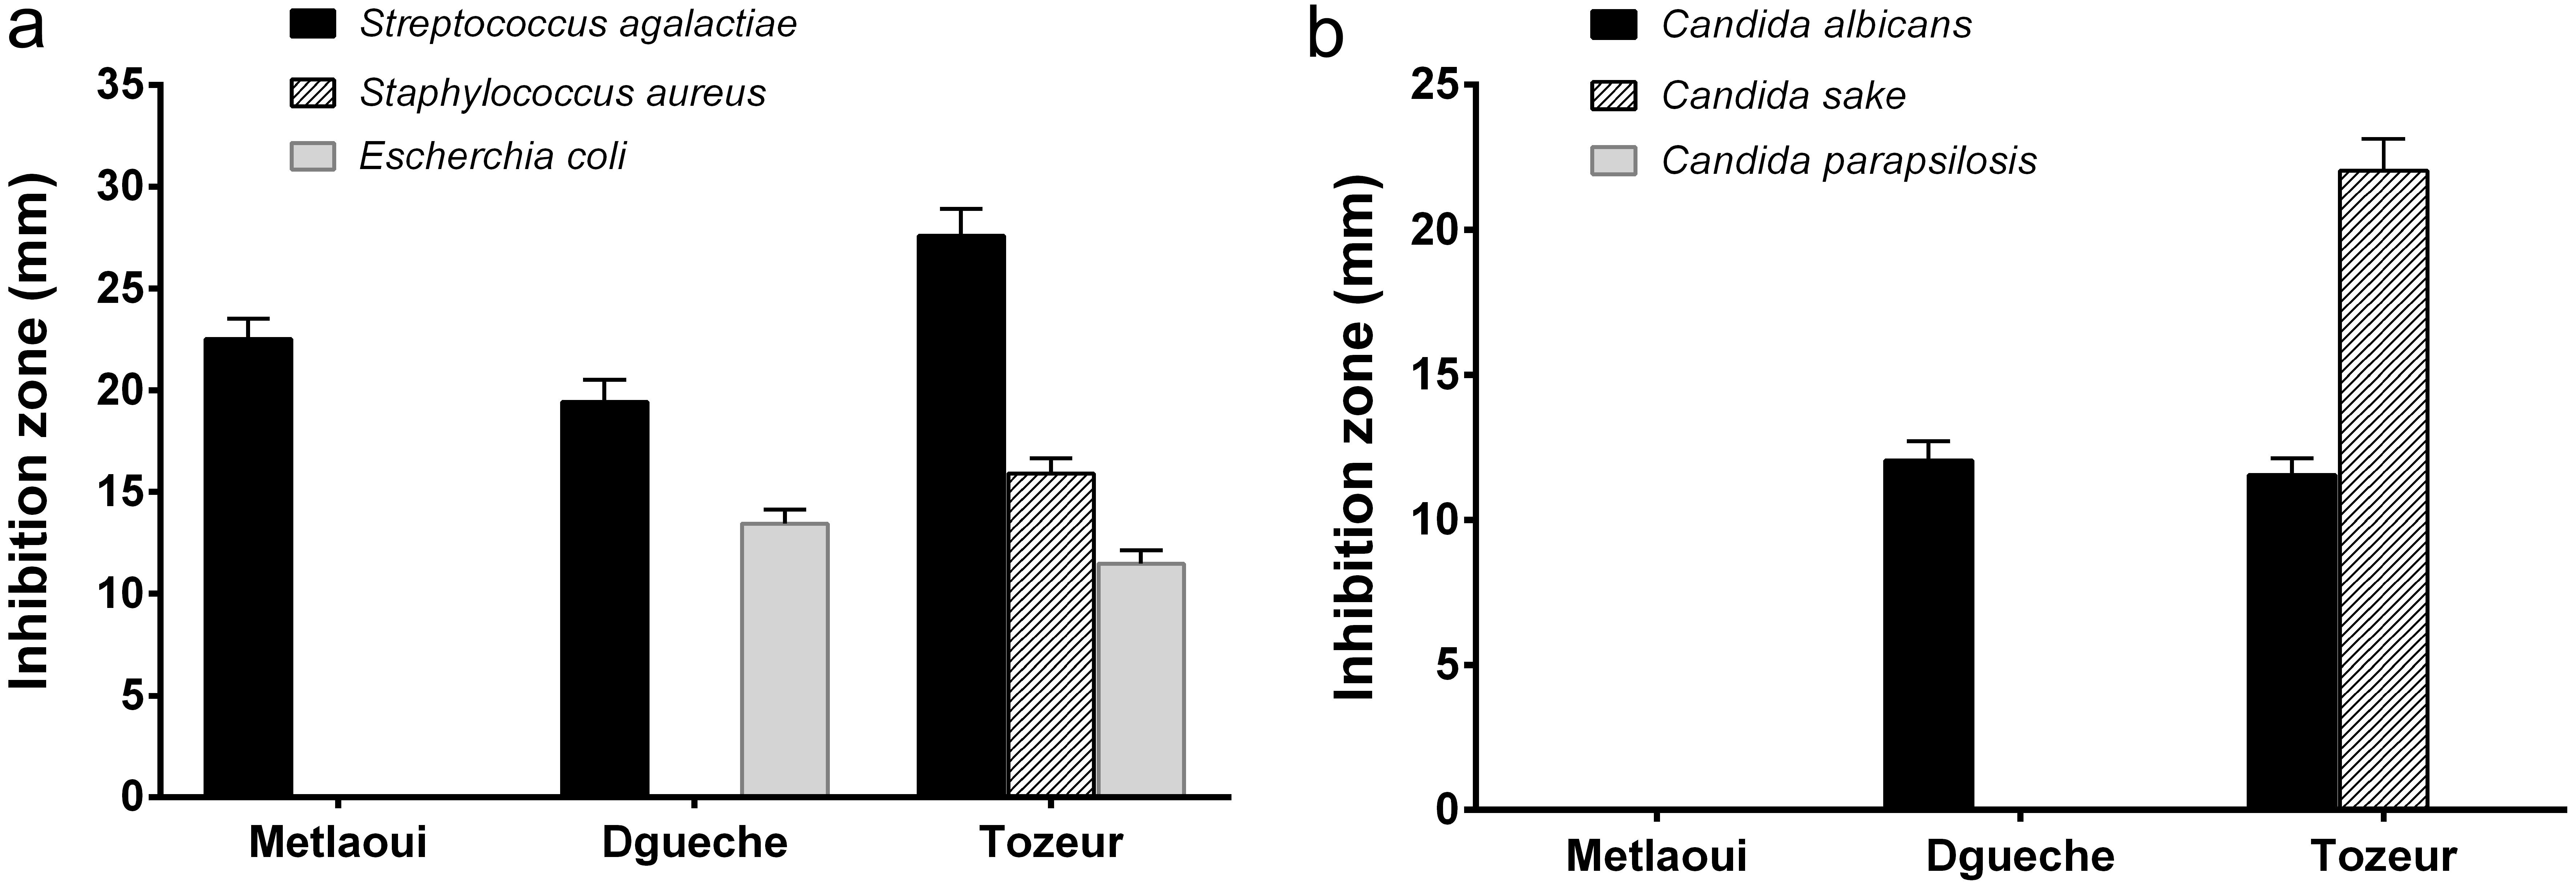 Antibacterial (a) and antifungal (b) activities of methanolic extracts of three <italic>Z. spina-christi</italic> extracts analyzed using the agar well diffusion method.